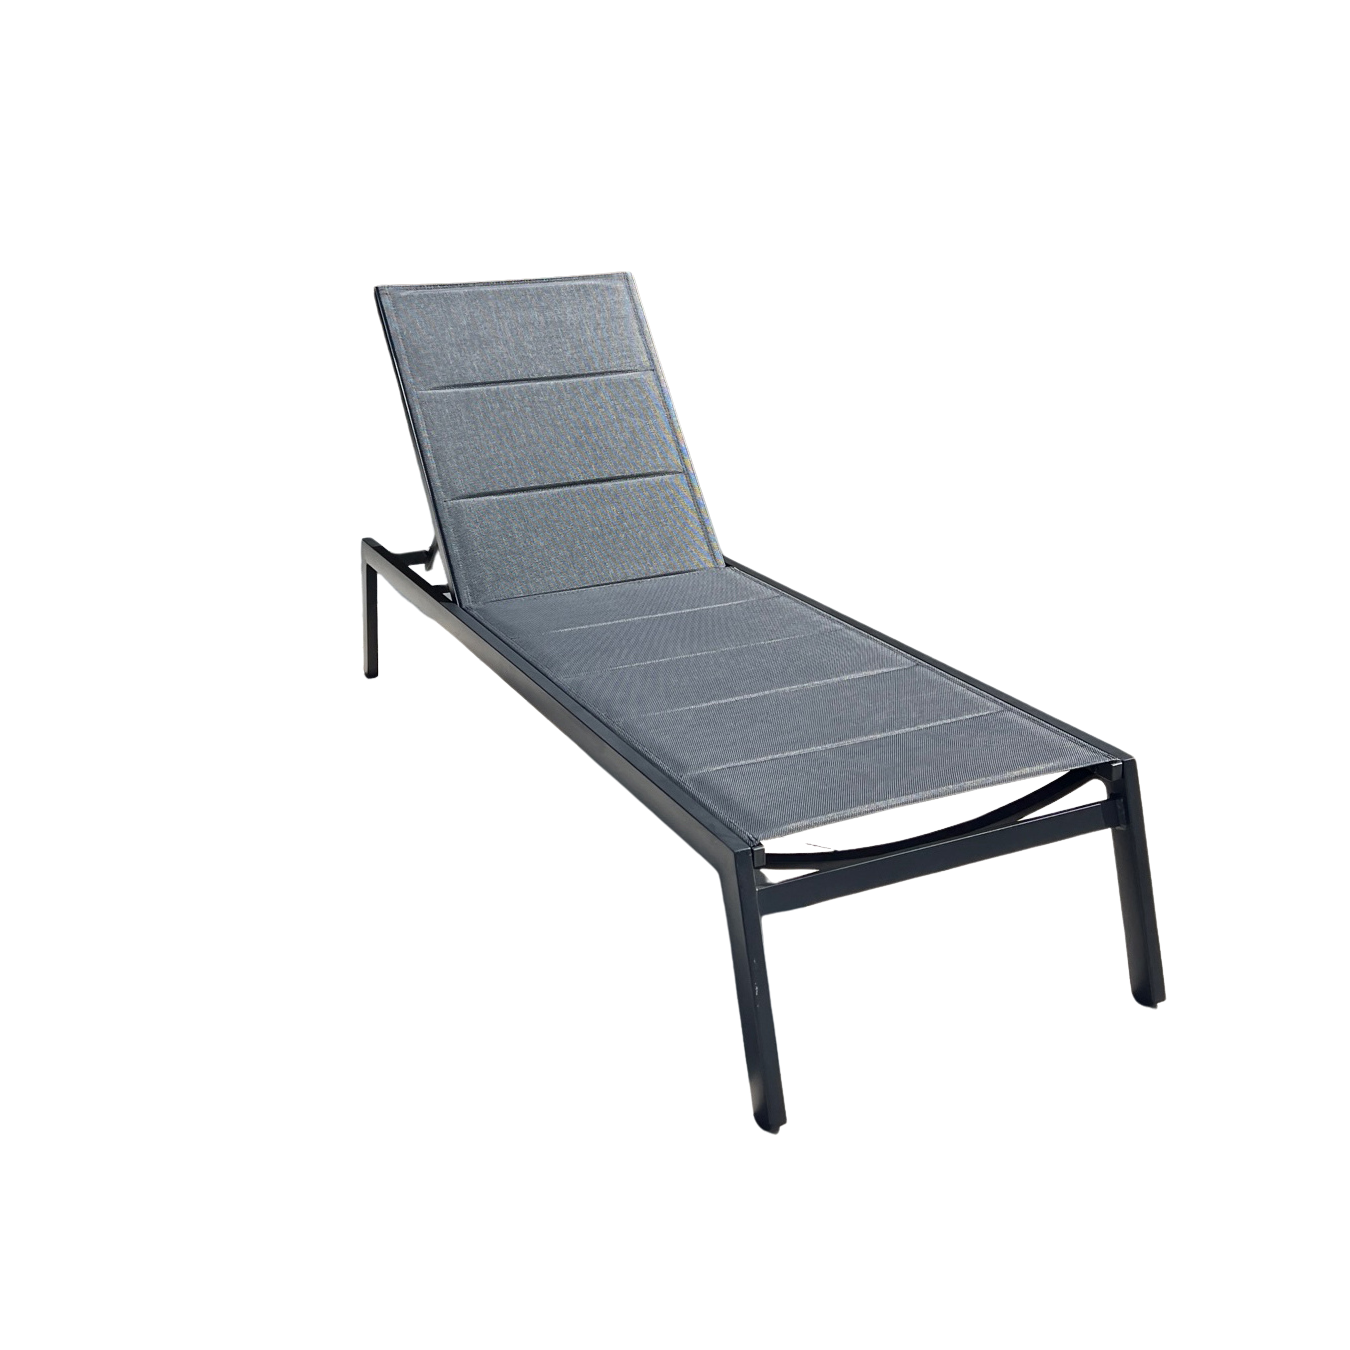 Breeze Chaise Lounge